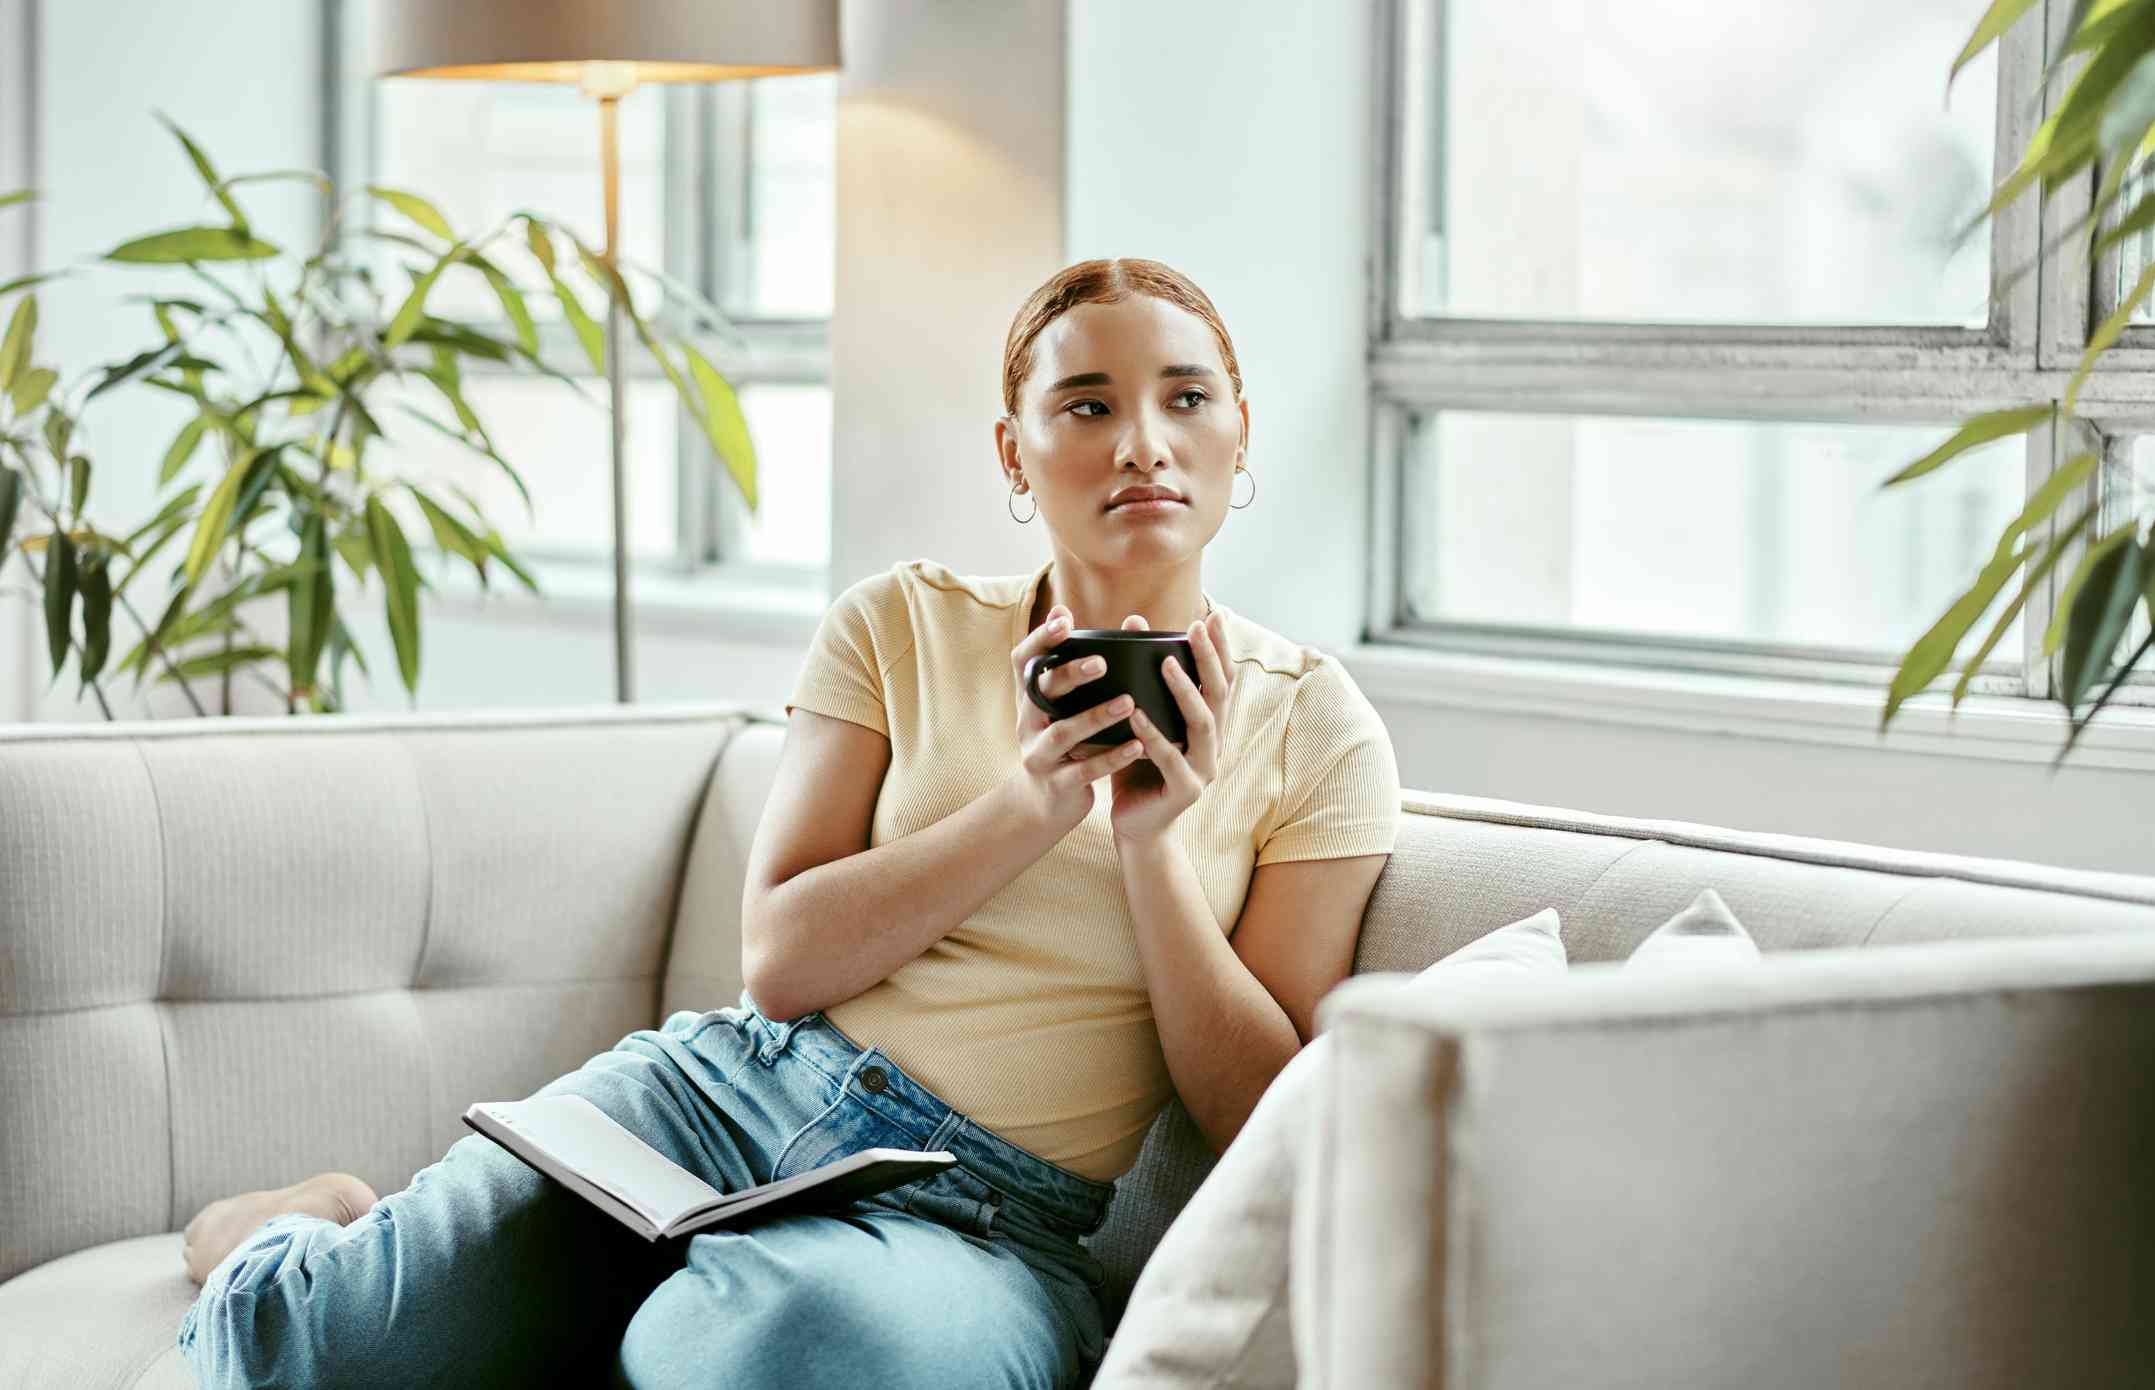 A woman in a yellow shirt sits on her couch while holding a mug of coffee and glances off with a sad expression.